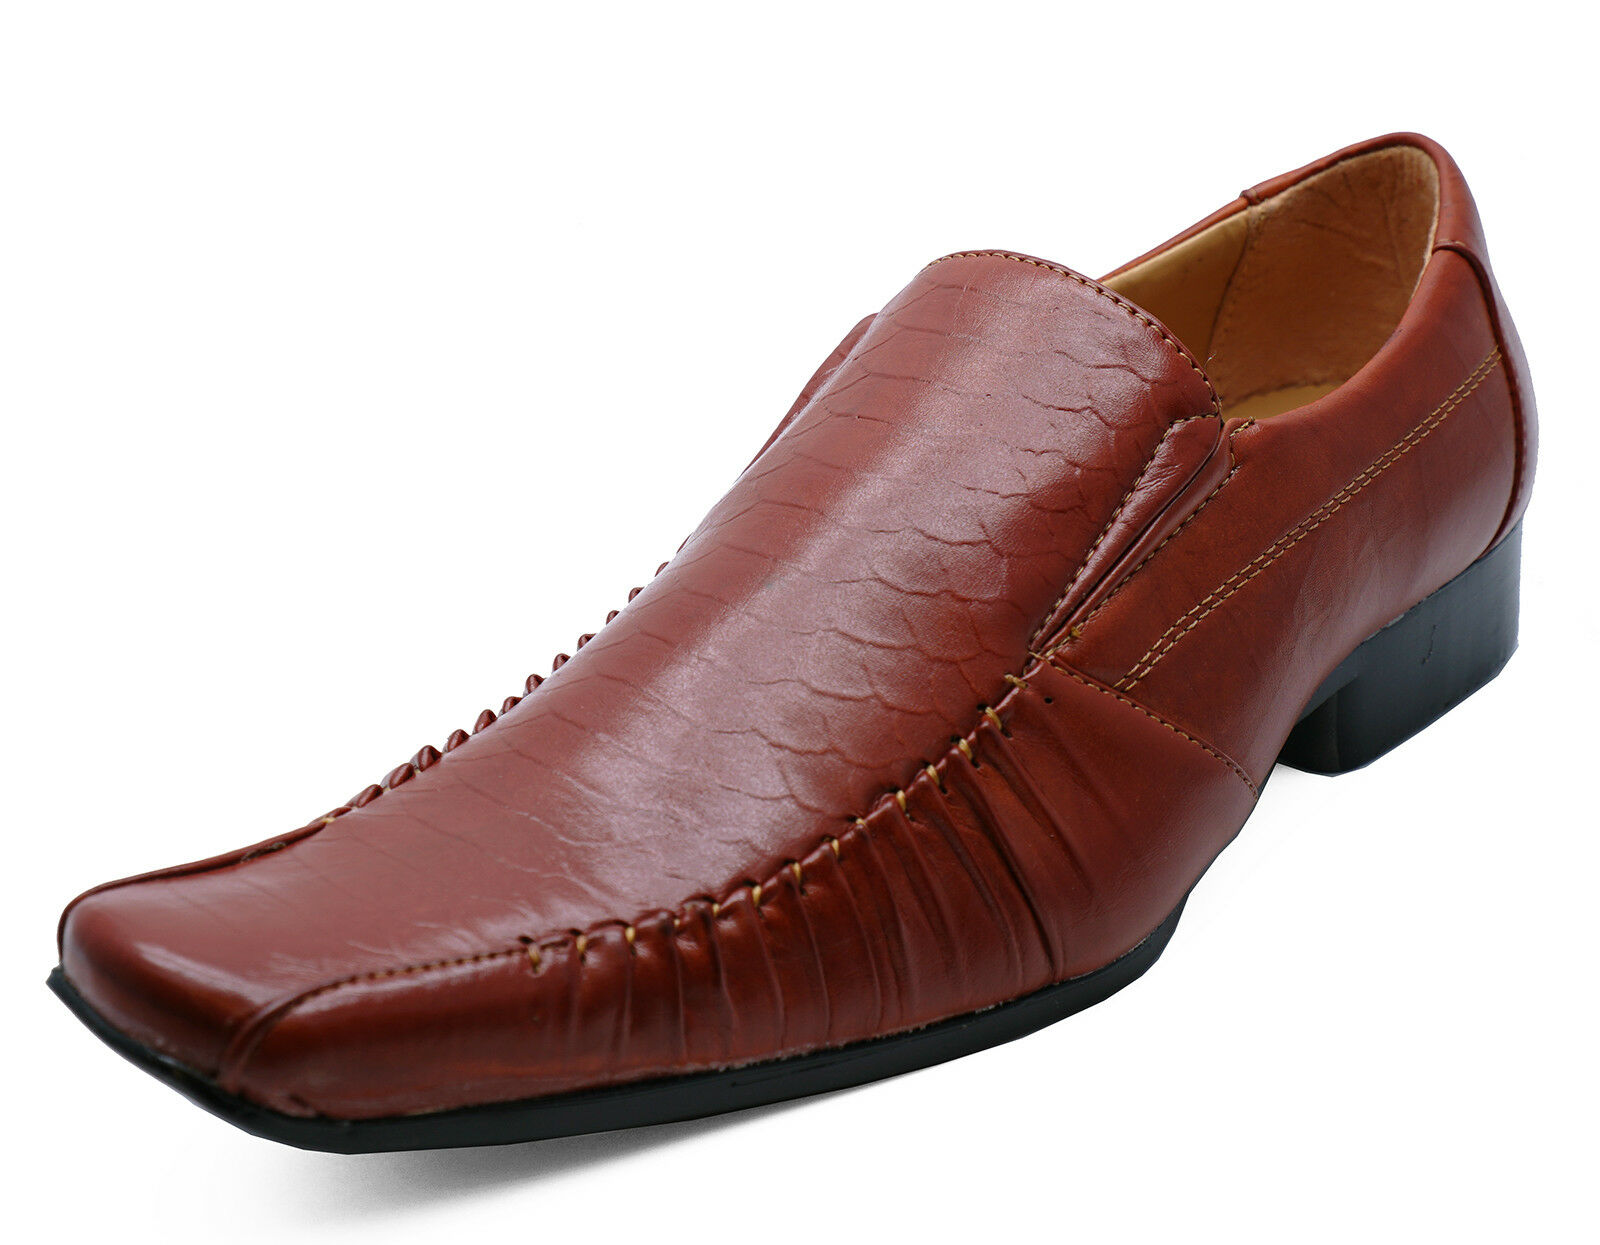 slip on shoes with suit